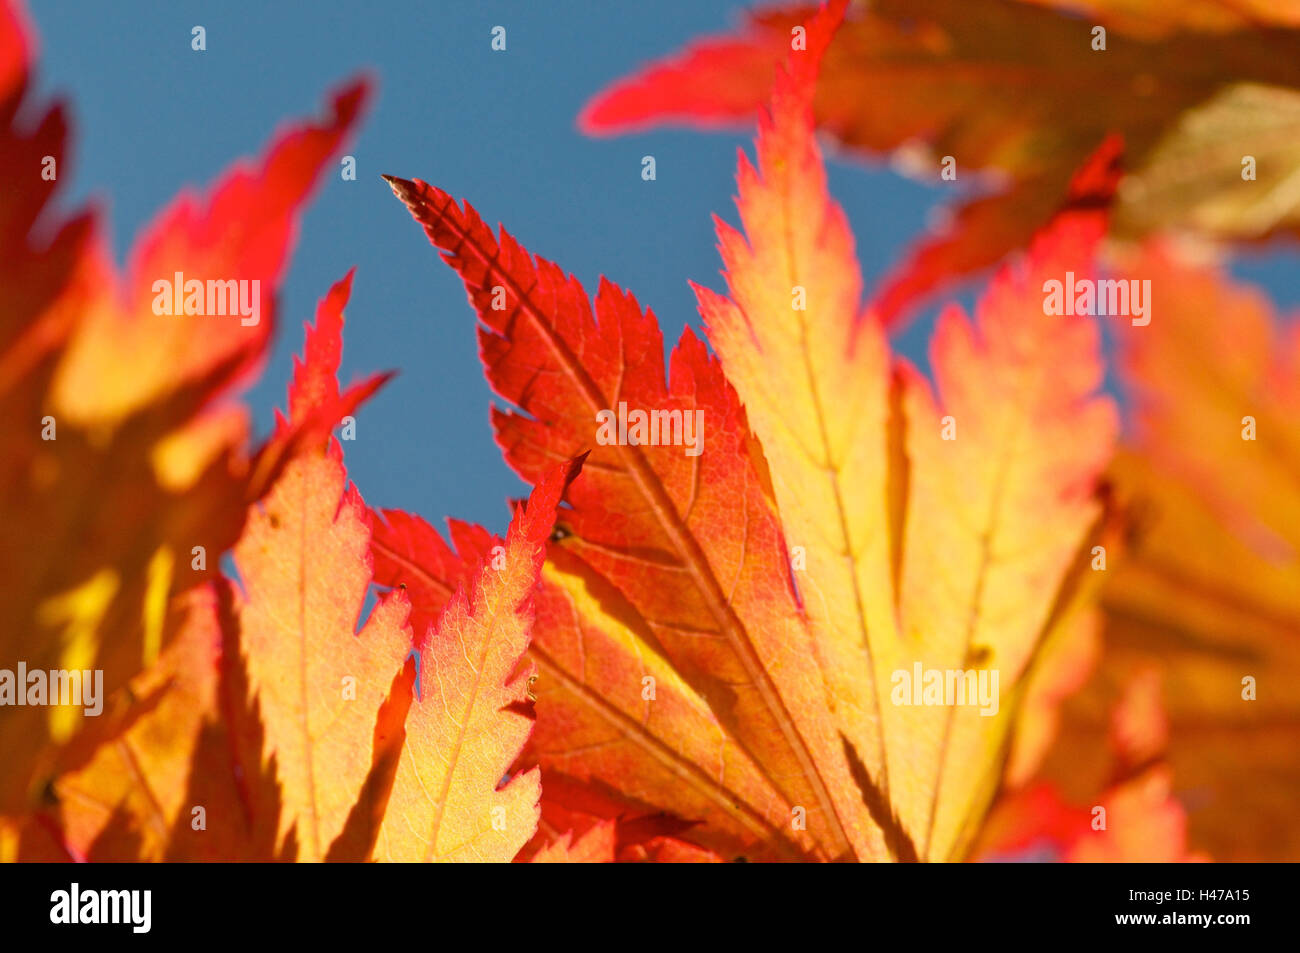 Maple leaves, peaks, autumn colouring, close-up, Stock Photo